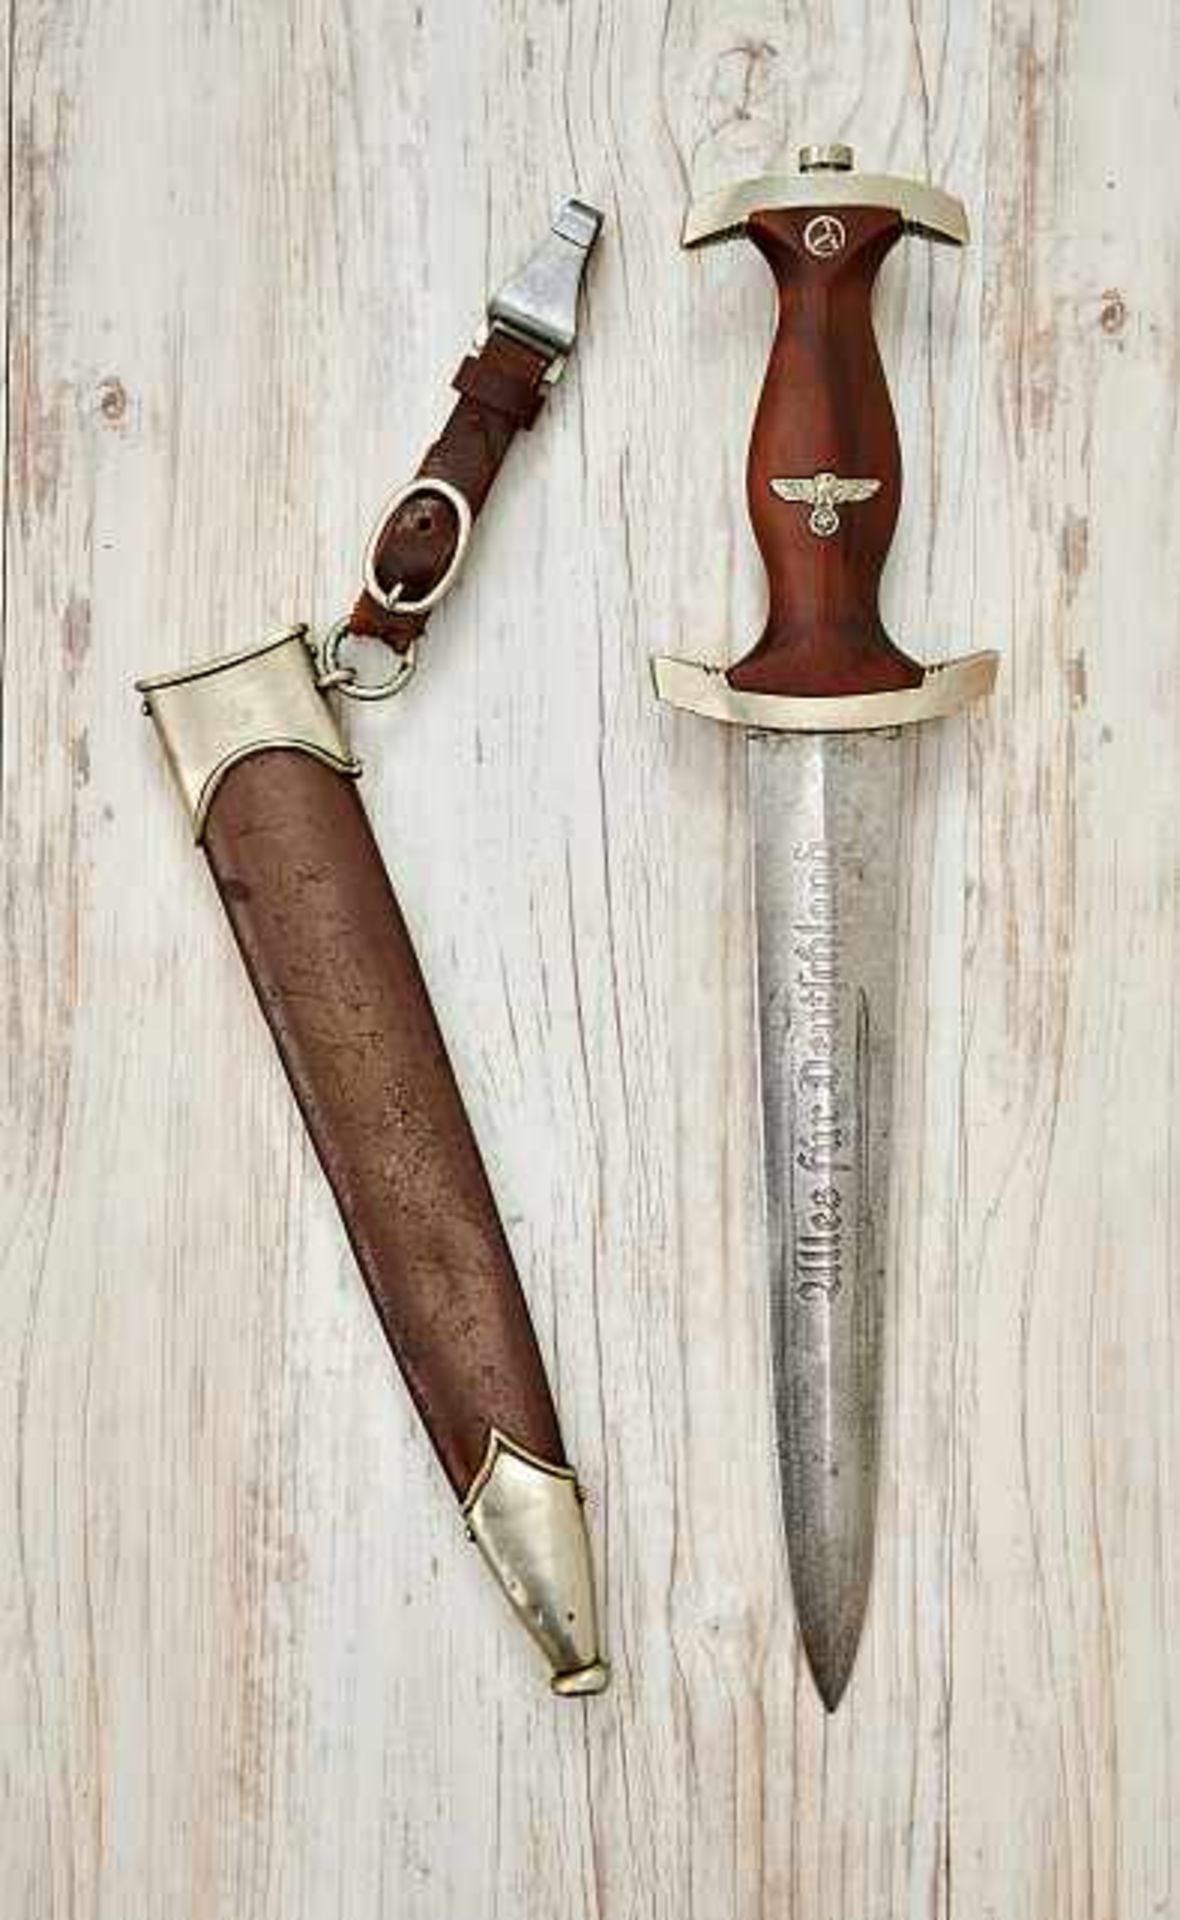 Deutsches Reich 1933 - 1945 - Sturmabteilung-SA : Early SA Dagger.Maker marked on ricasso to C.